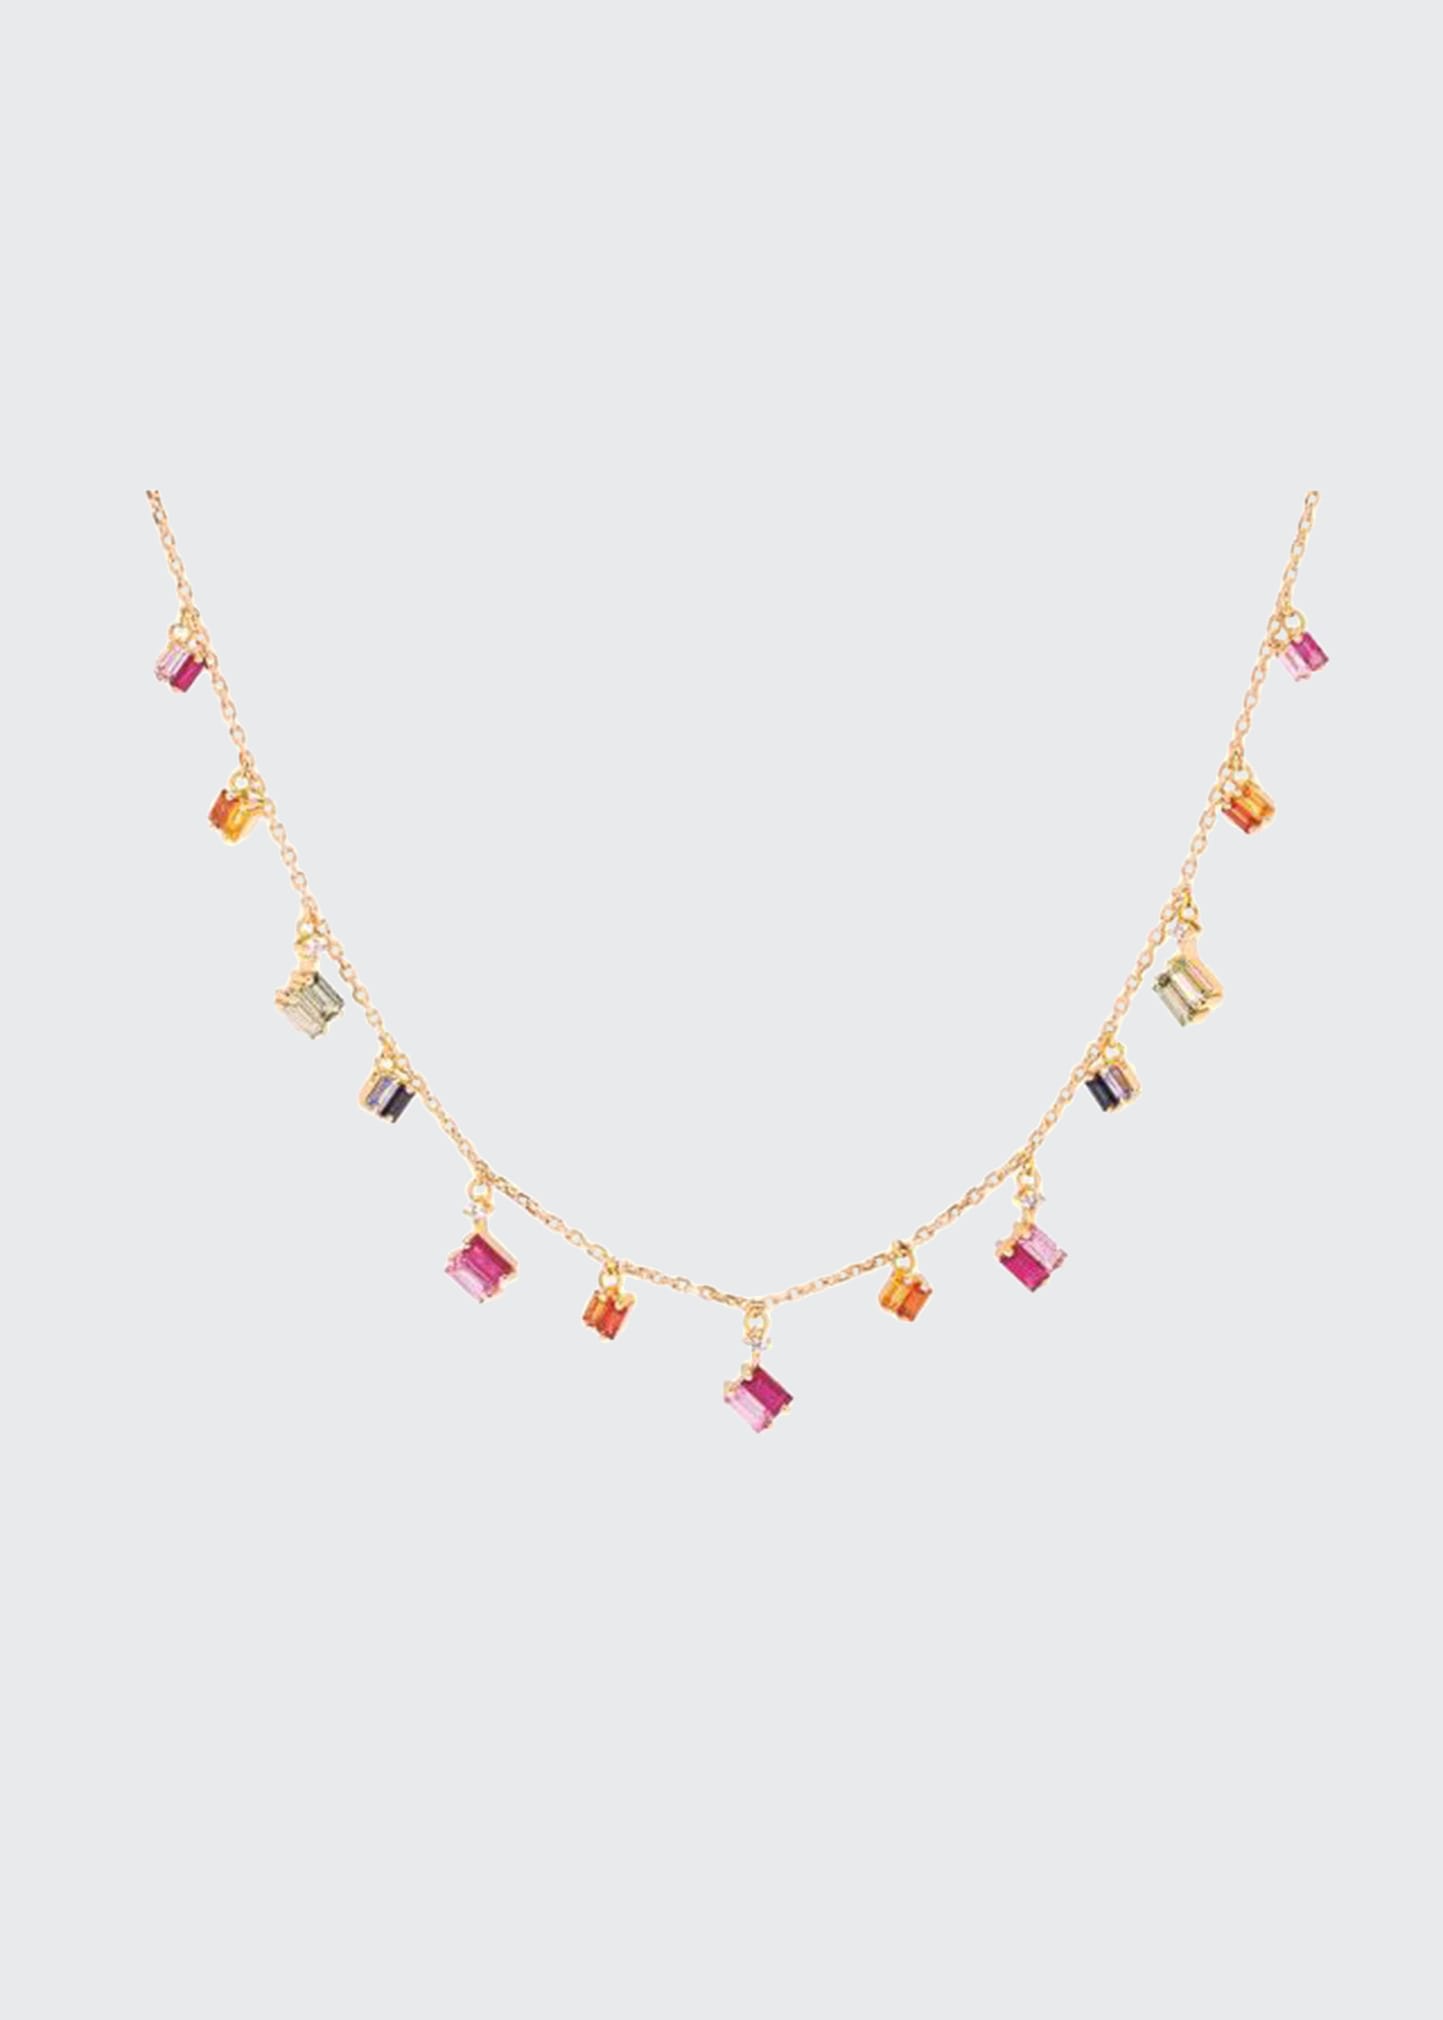 SUZANNE KALAN 18K YELLOW GOLD RAINBOW NECKLACE 0.10 CT. ROUND WHITE DIAMOND 3.20 CT. COLORED SAPPHIRE BAGUETTES